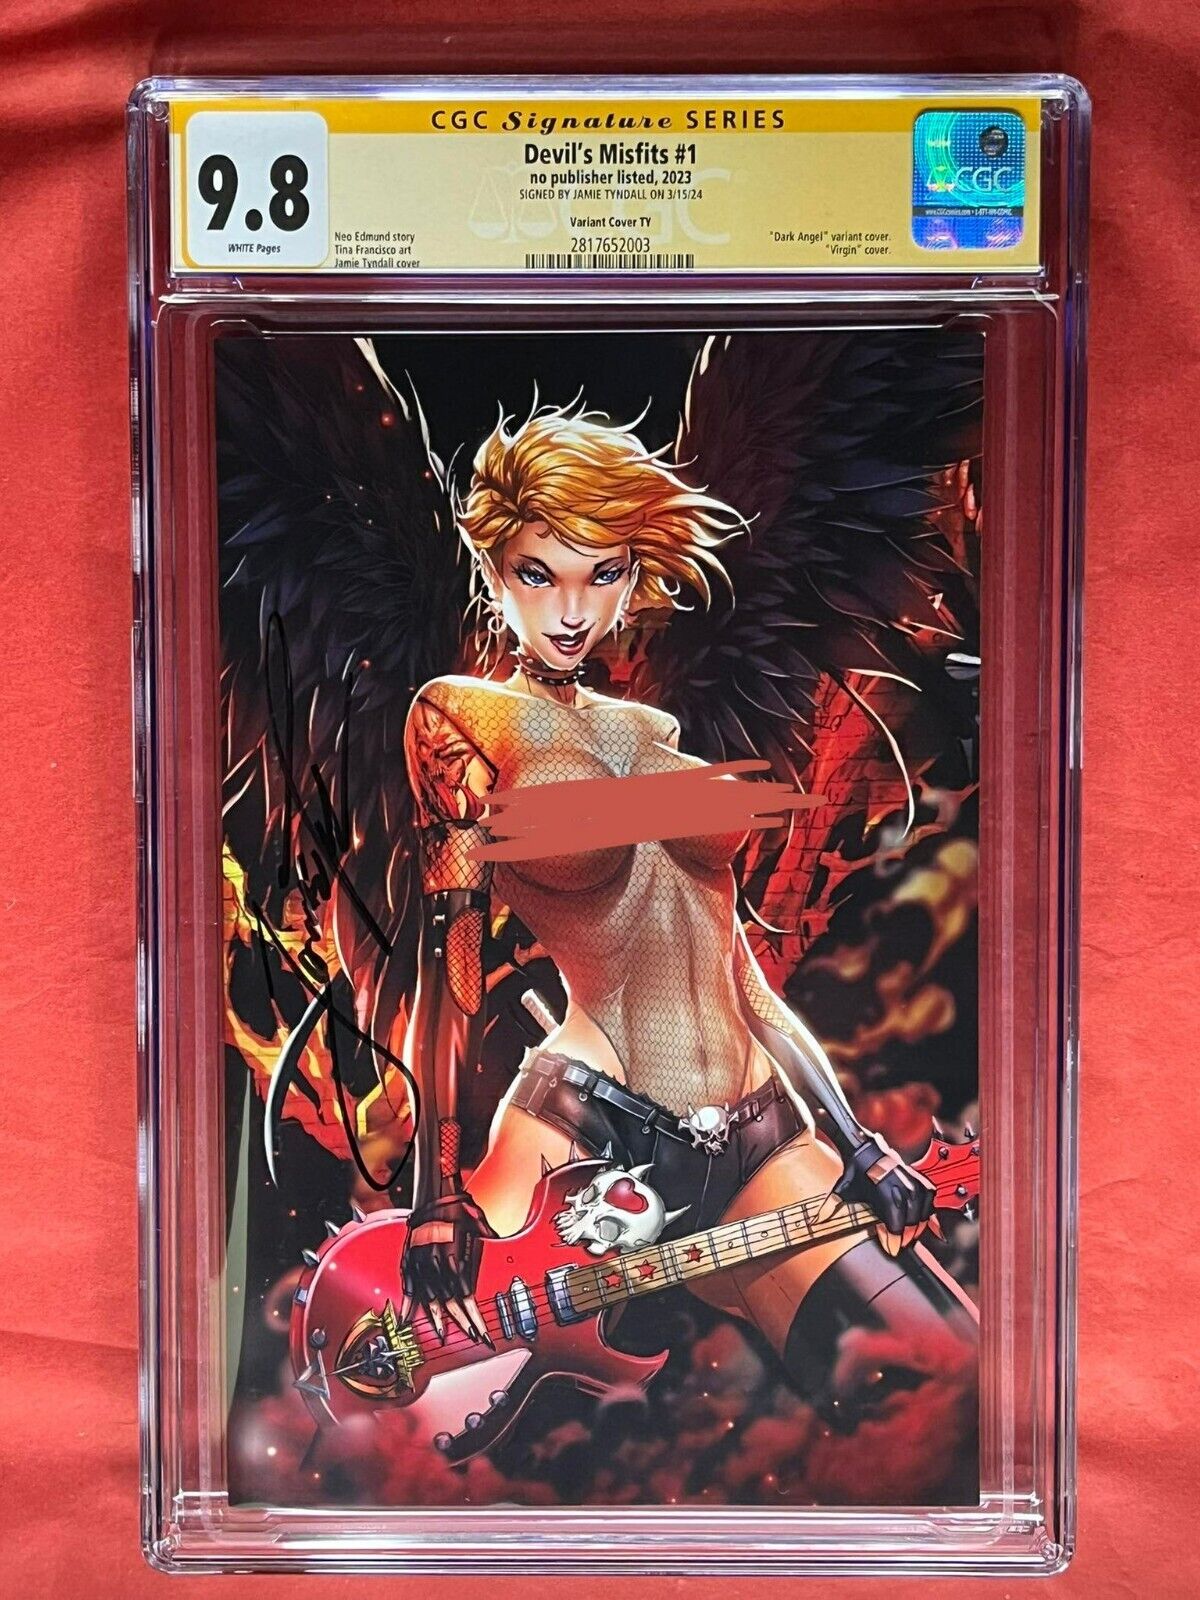 The Devil’s Misfits 1 Cover TY Variant CGC 9.8 SS signed by Jamie Tyndall